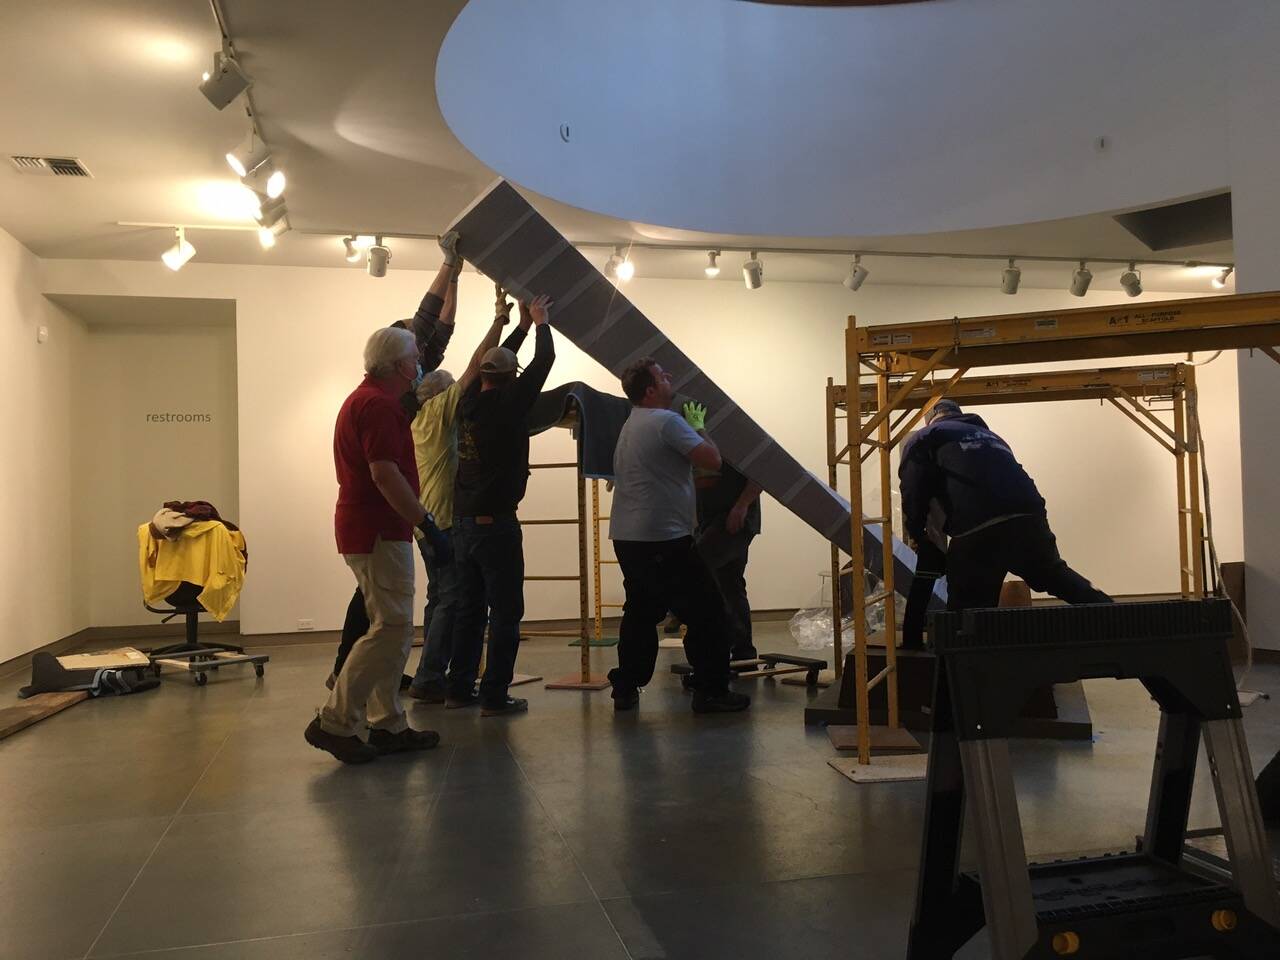 Photos provided
Museum personnel set up Richard Nash’s 12-foot sculpture “Segmented Prism #2” at the Museum of Northwest Art in La Conner, where it will stand as the centerpiece of a full survey of his work on the museum’s main floor for the next three months.